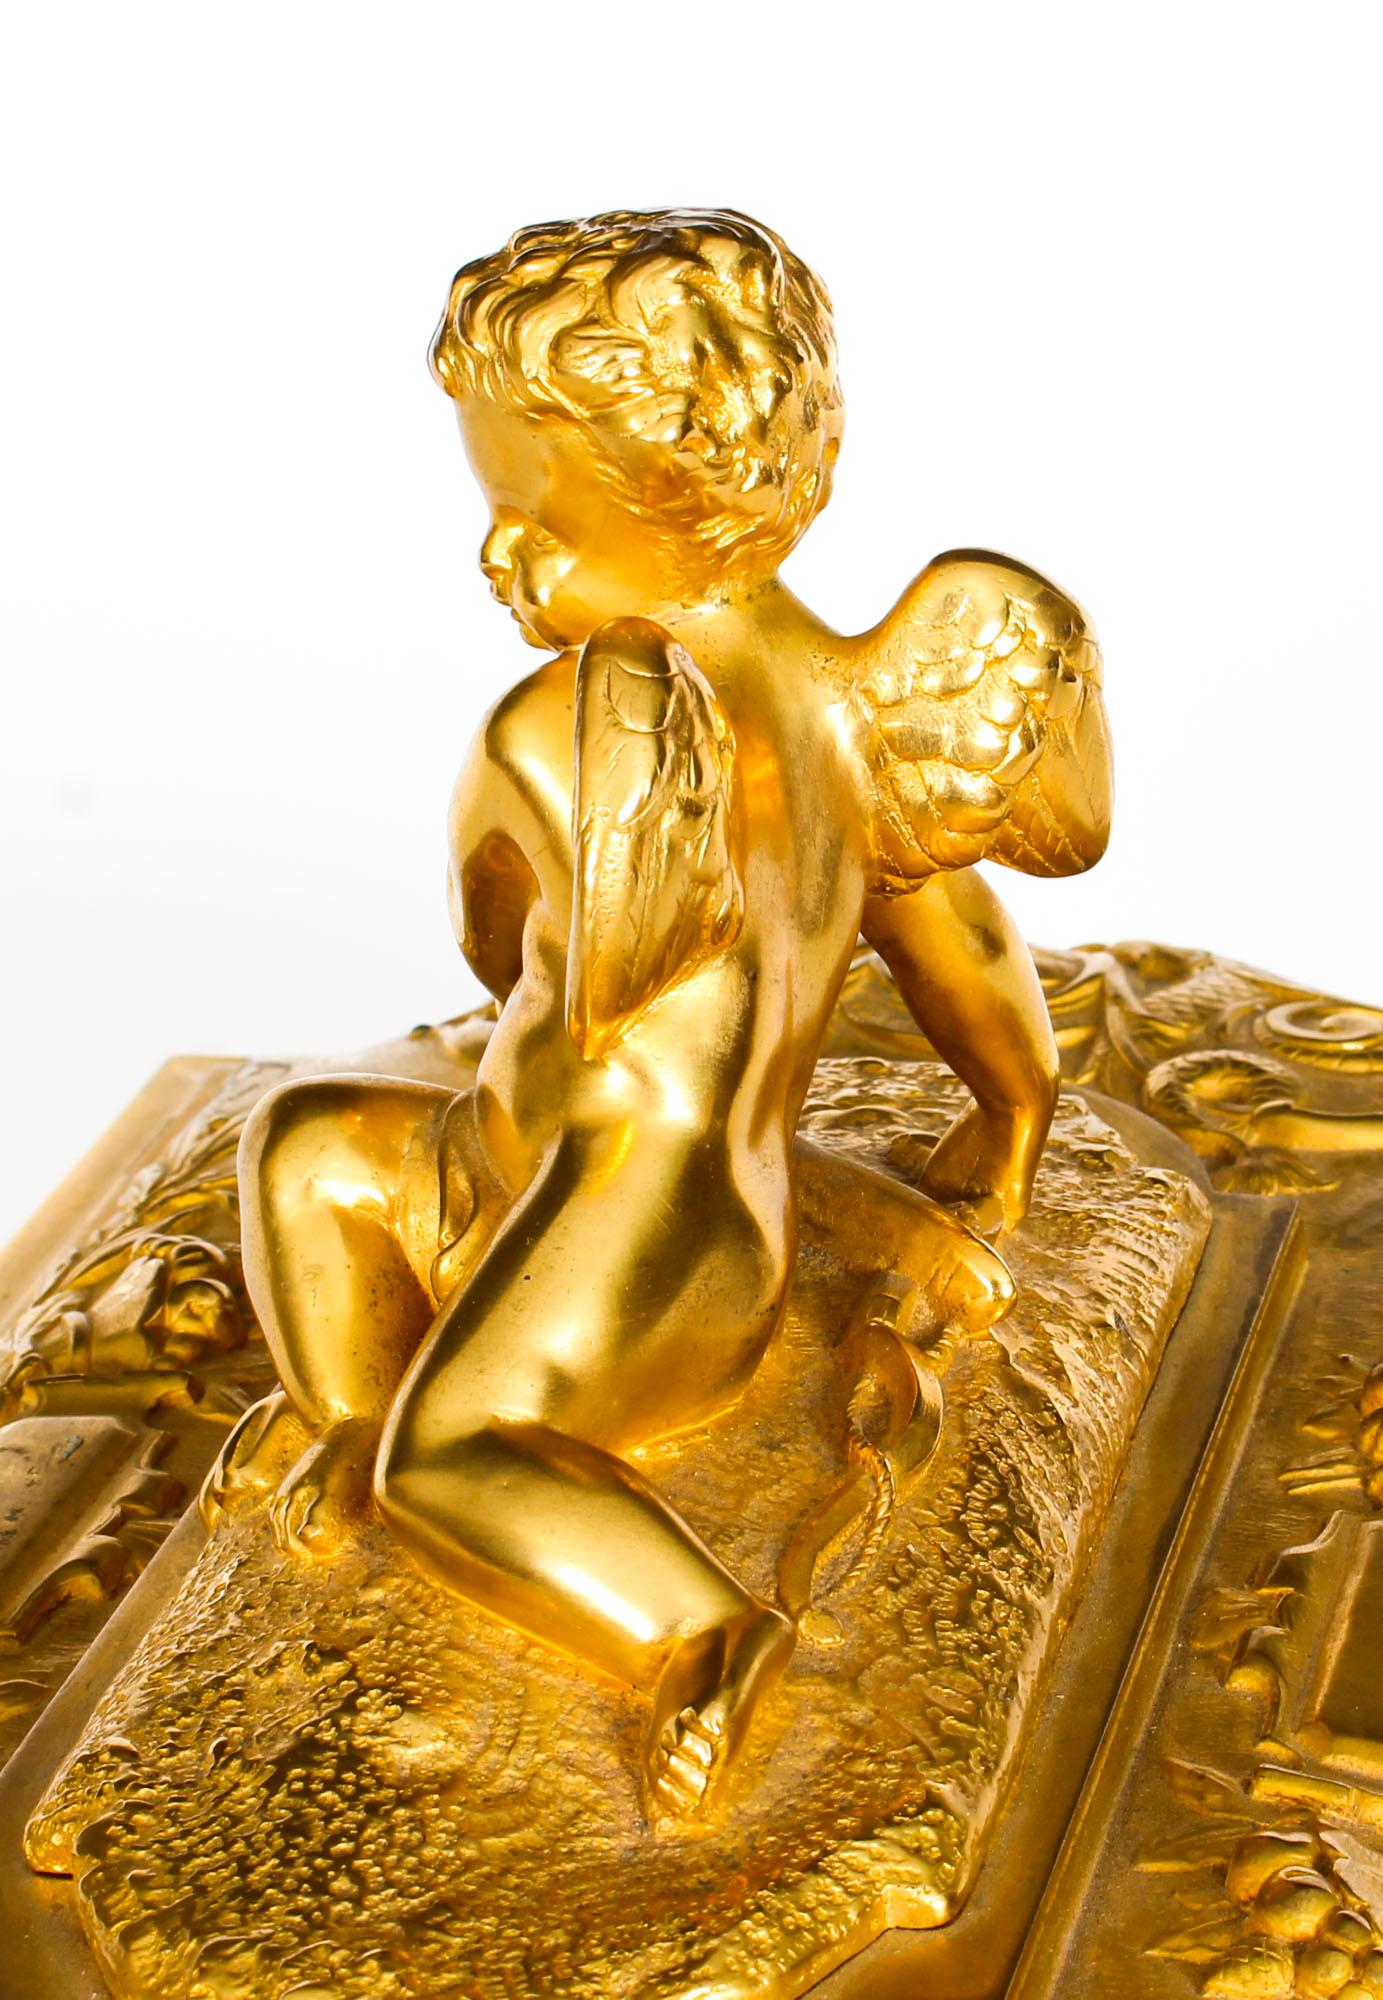 Late 19th Century Antique French Ormolu Casket with Cupid, 19th Century